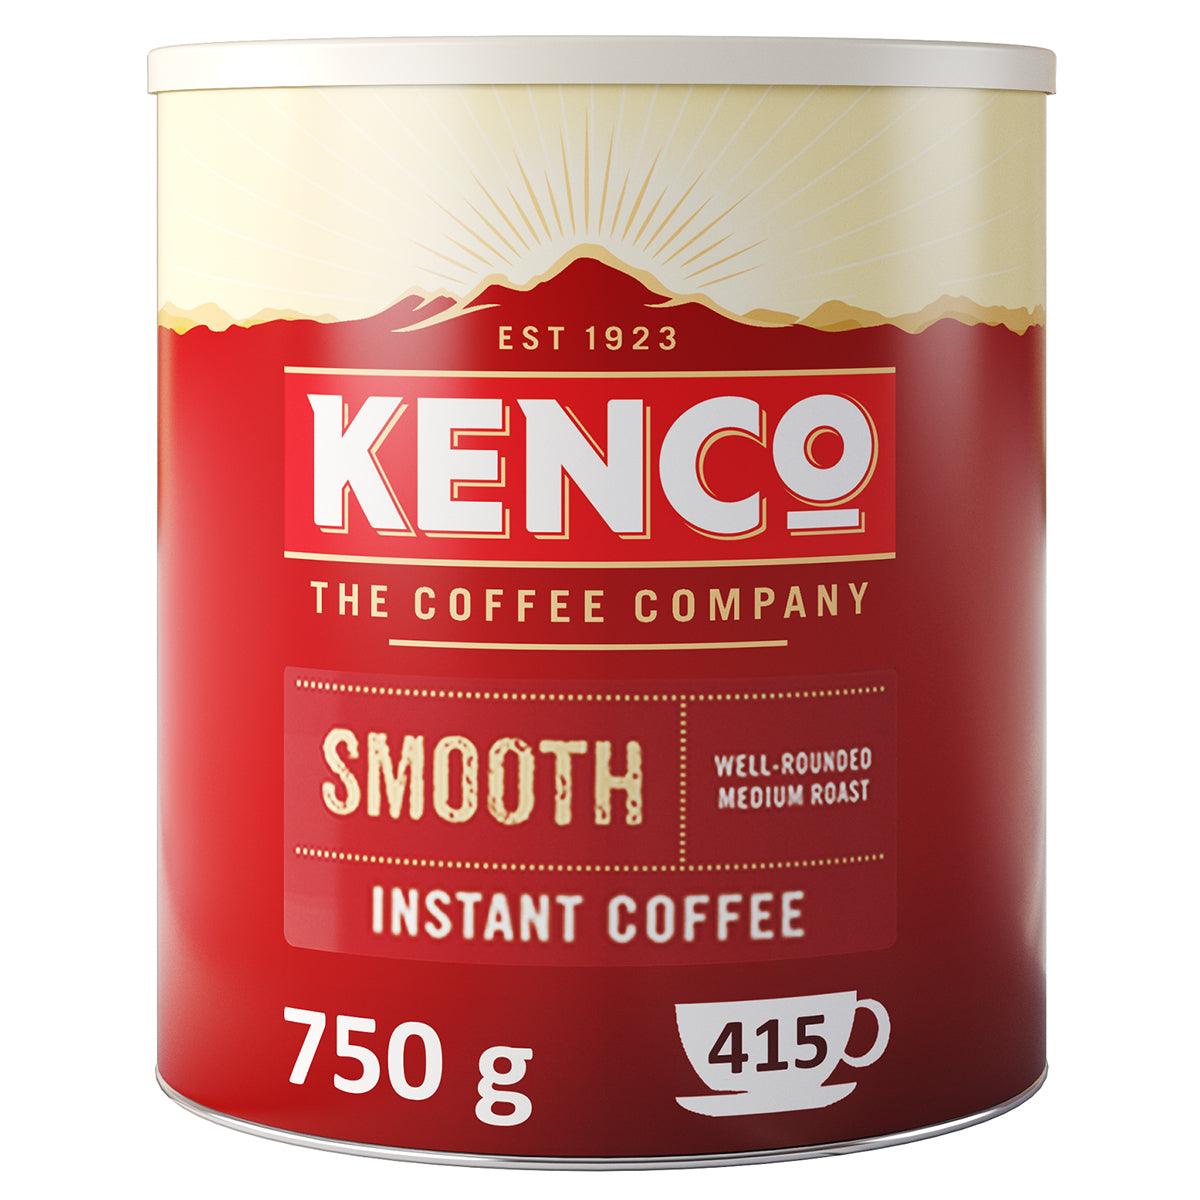 Kenco Smooth: Catering Coffee Tin 750g - Vending Superstore